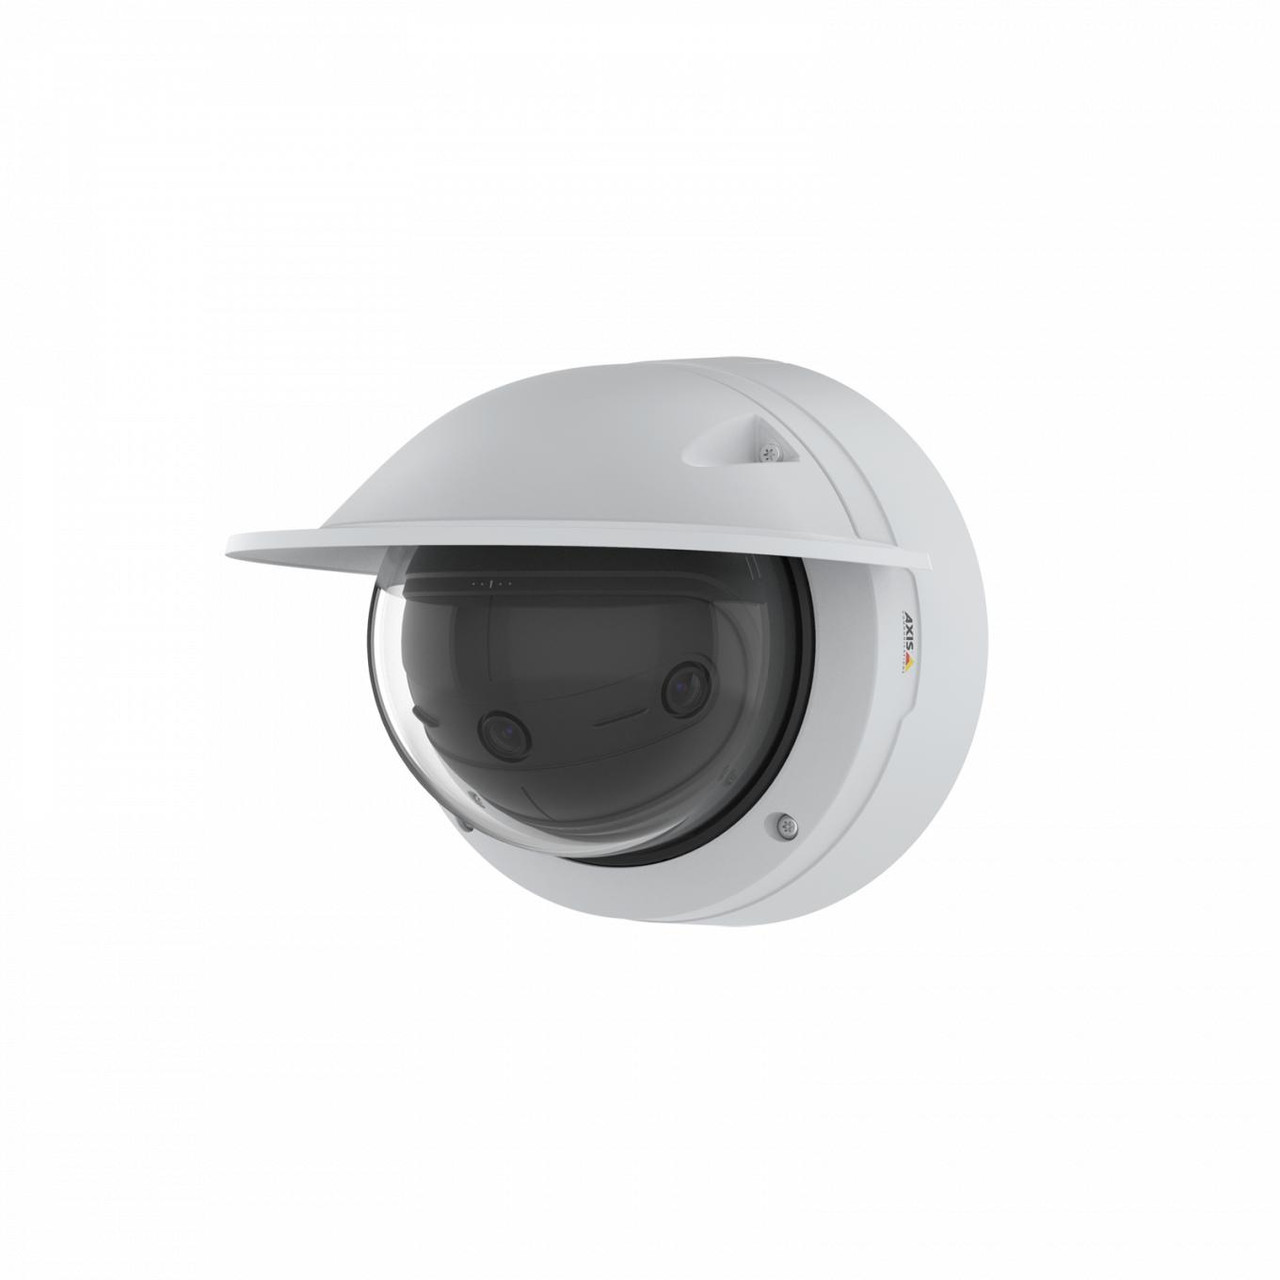 AXIS P3818-PVE Panoramic Fixed Dome Camera (Part# 02060-001)